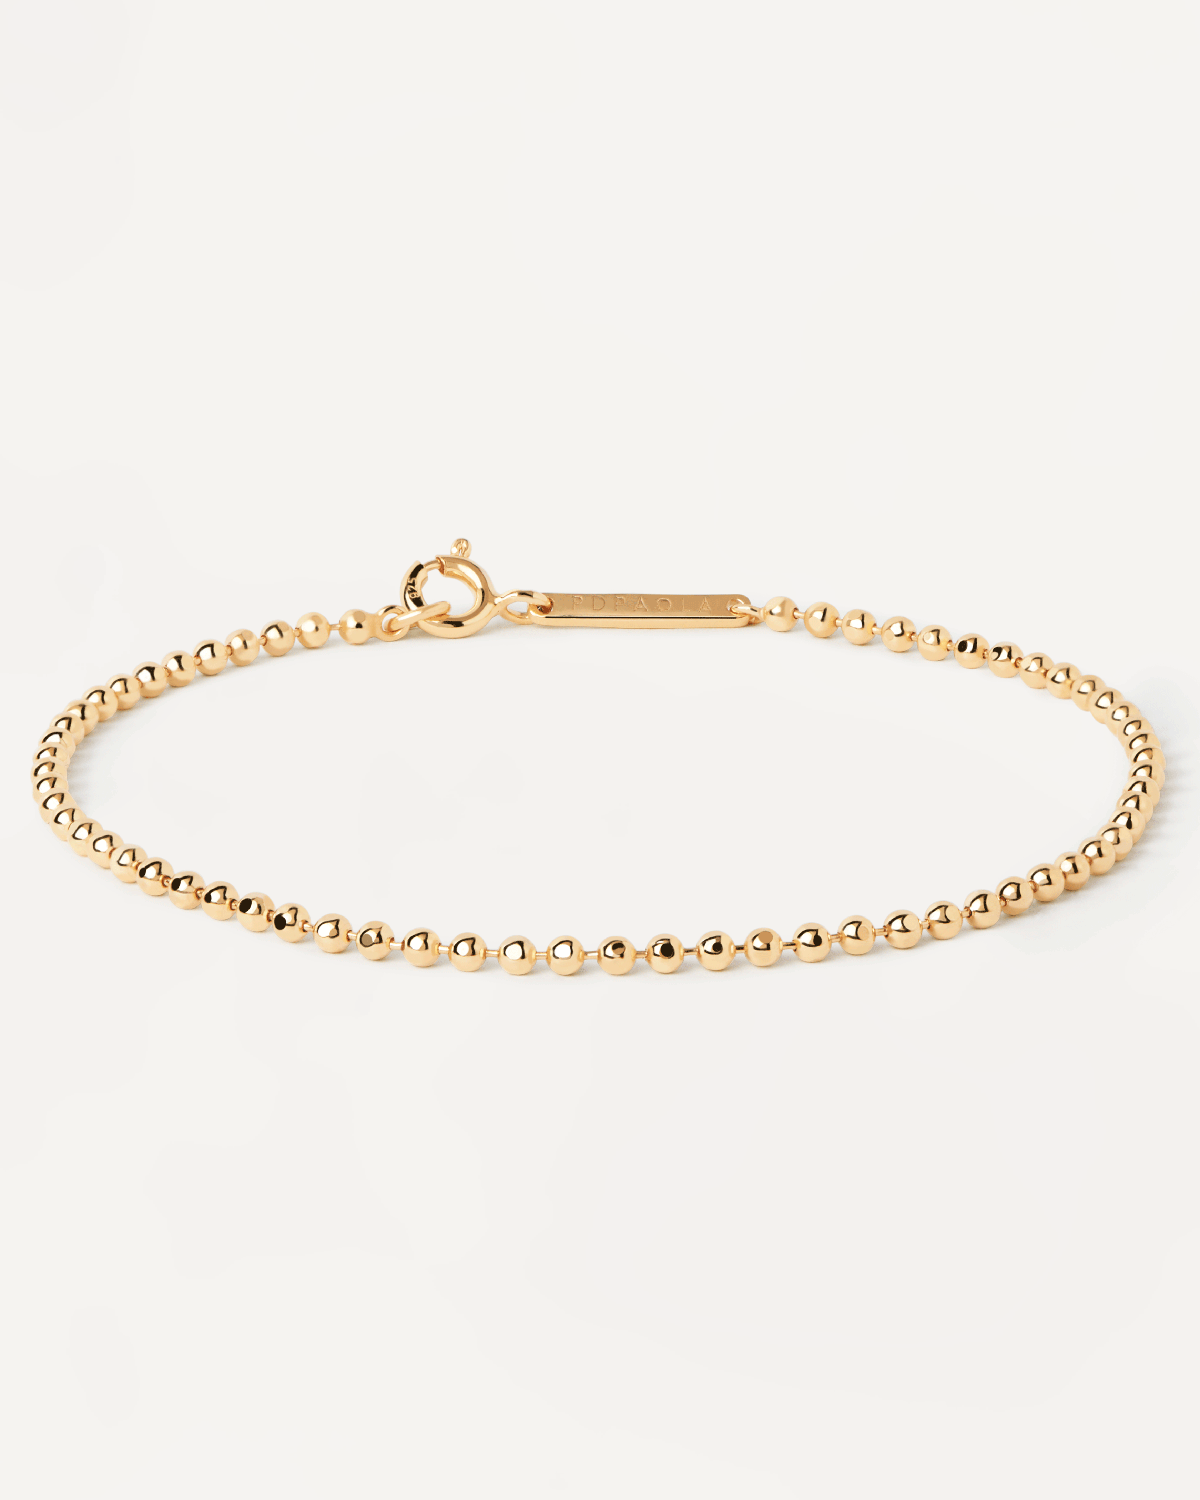 2023 Selection | Ball Chain Bracelet. Ball-textured chain bracelet in plain gold-plated silver. Get the latest arrival from PDPAOLA. Place your order safely and get this Best Seller. Free Shipping.